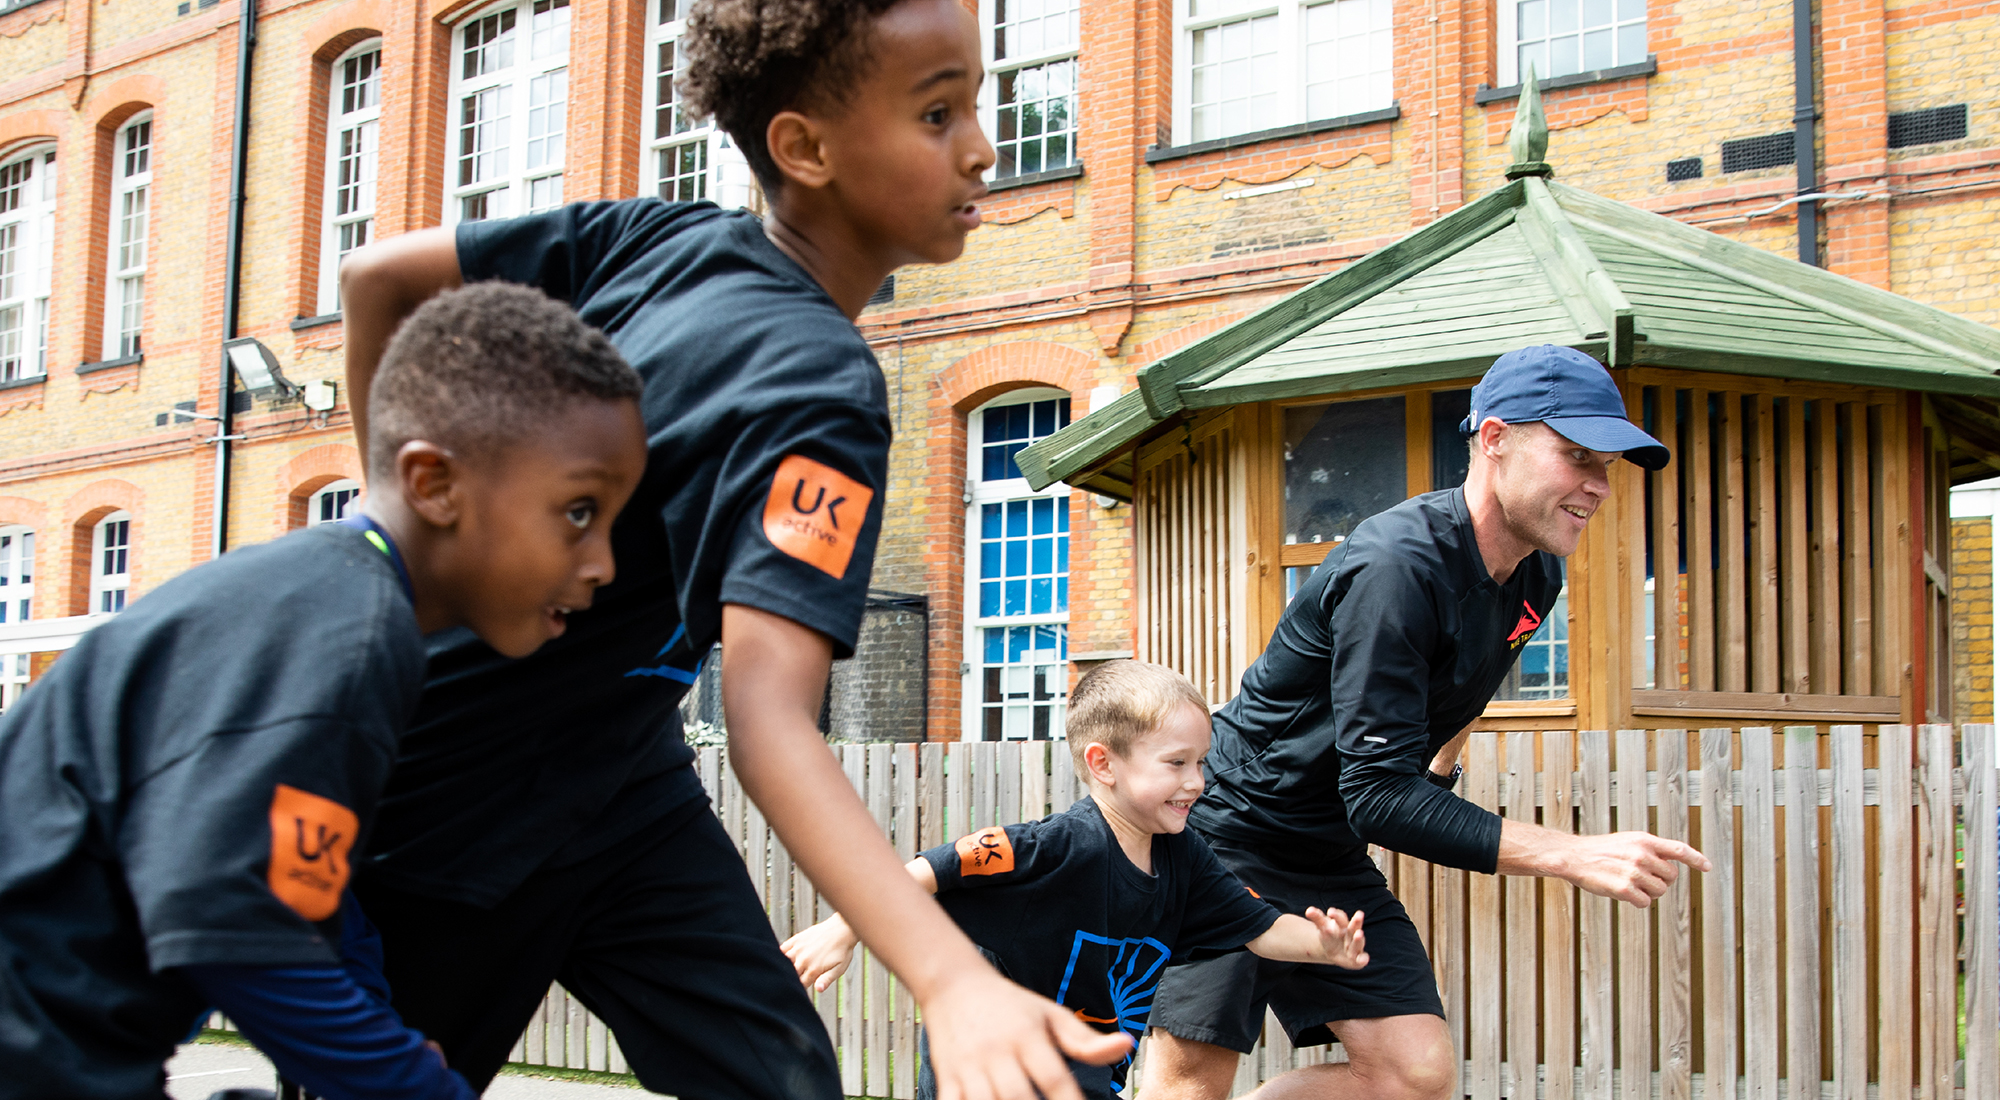 ukactive and Nike launch Open Doors summer programme to provide sport and food to children and young people as health inequalities grow